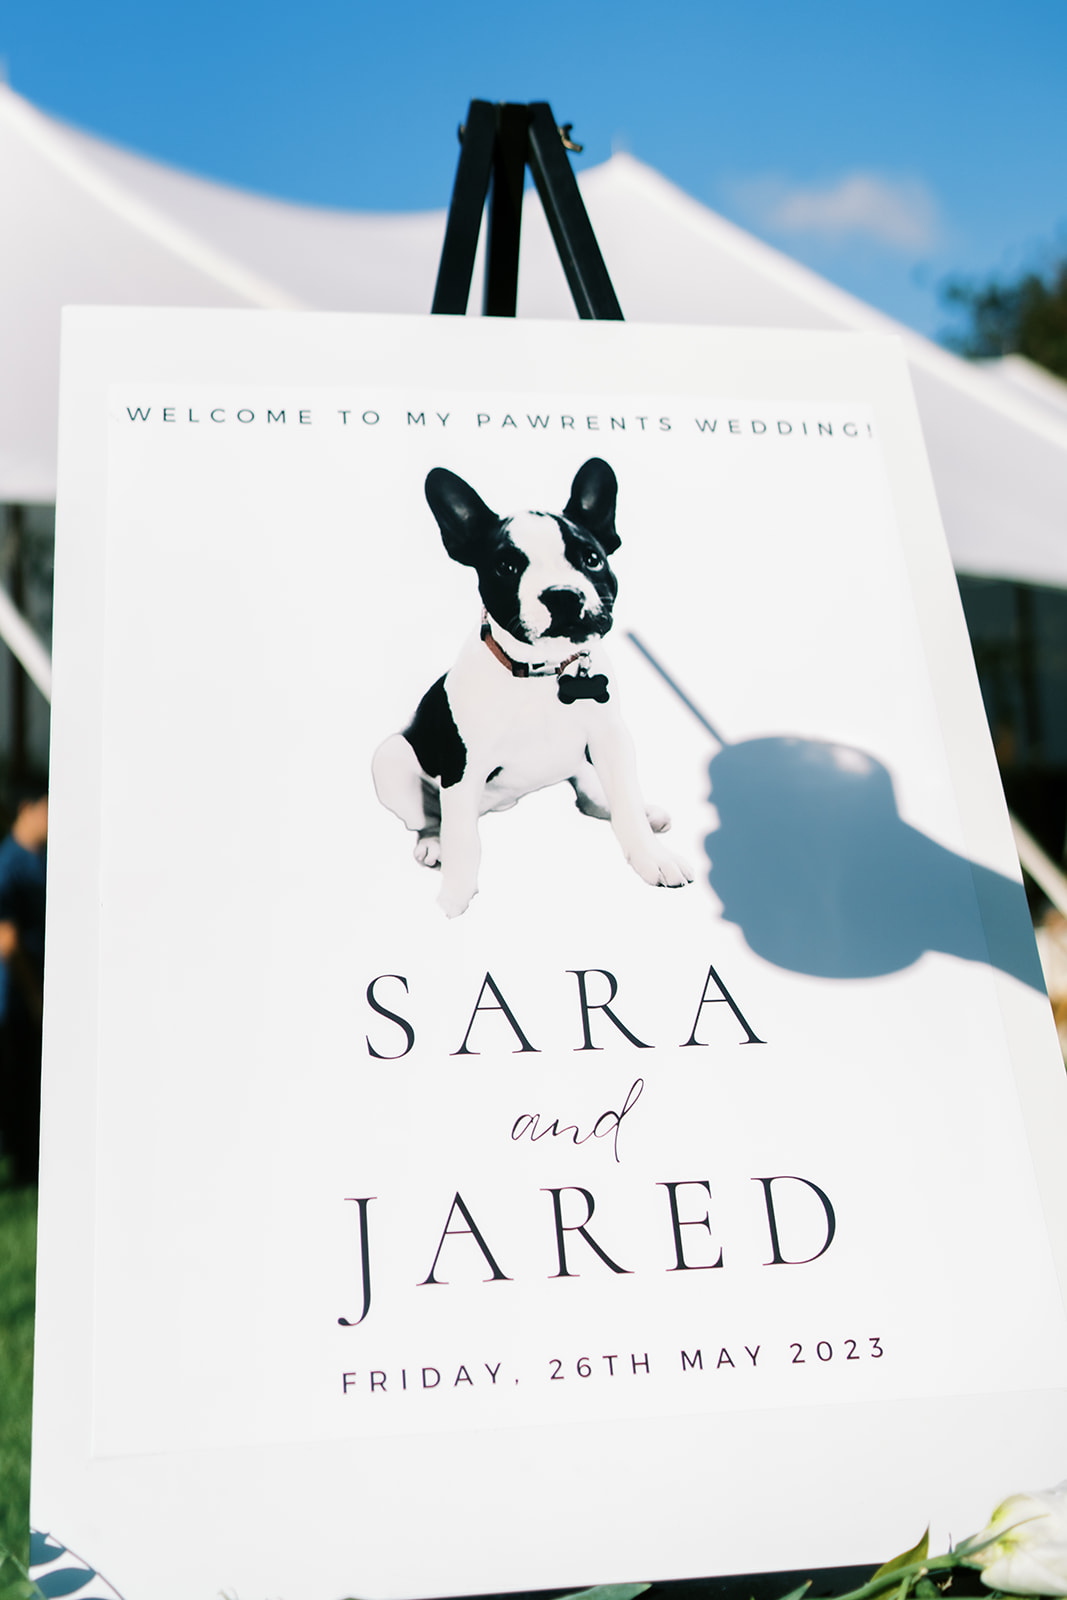 A wedding welcome sign featuring the names "sara and jared" with the date below and an illustration of a boston terrier